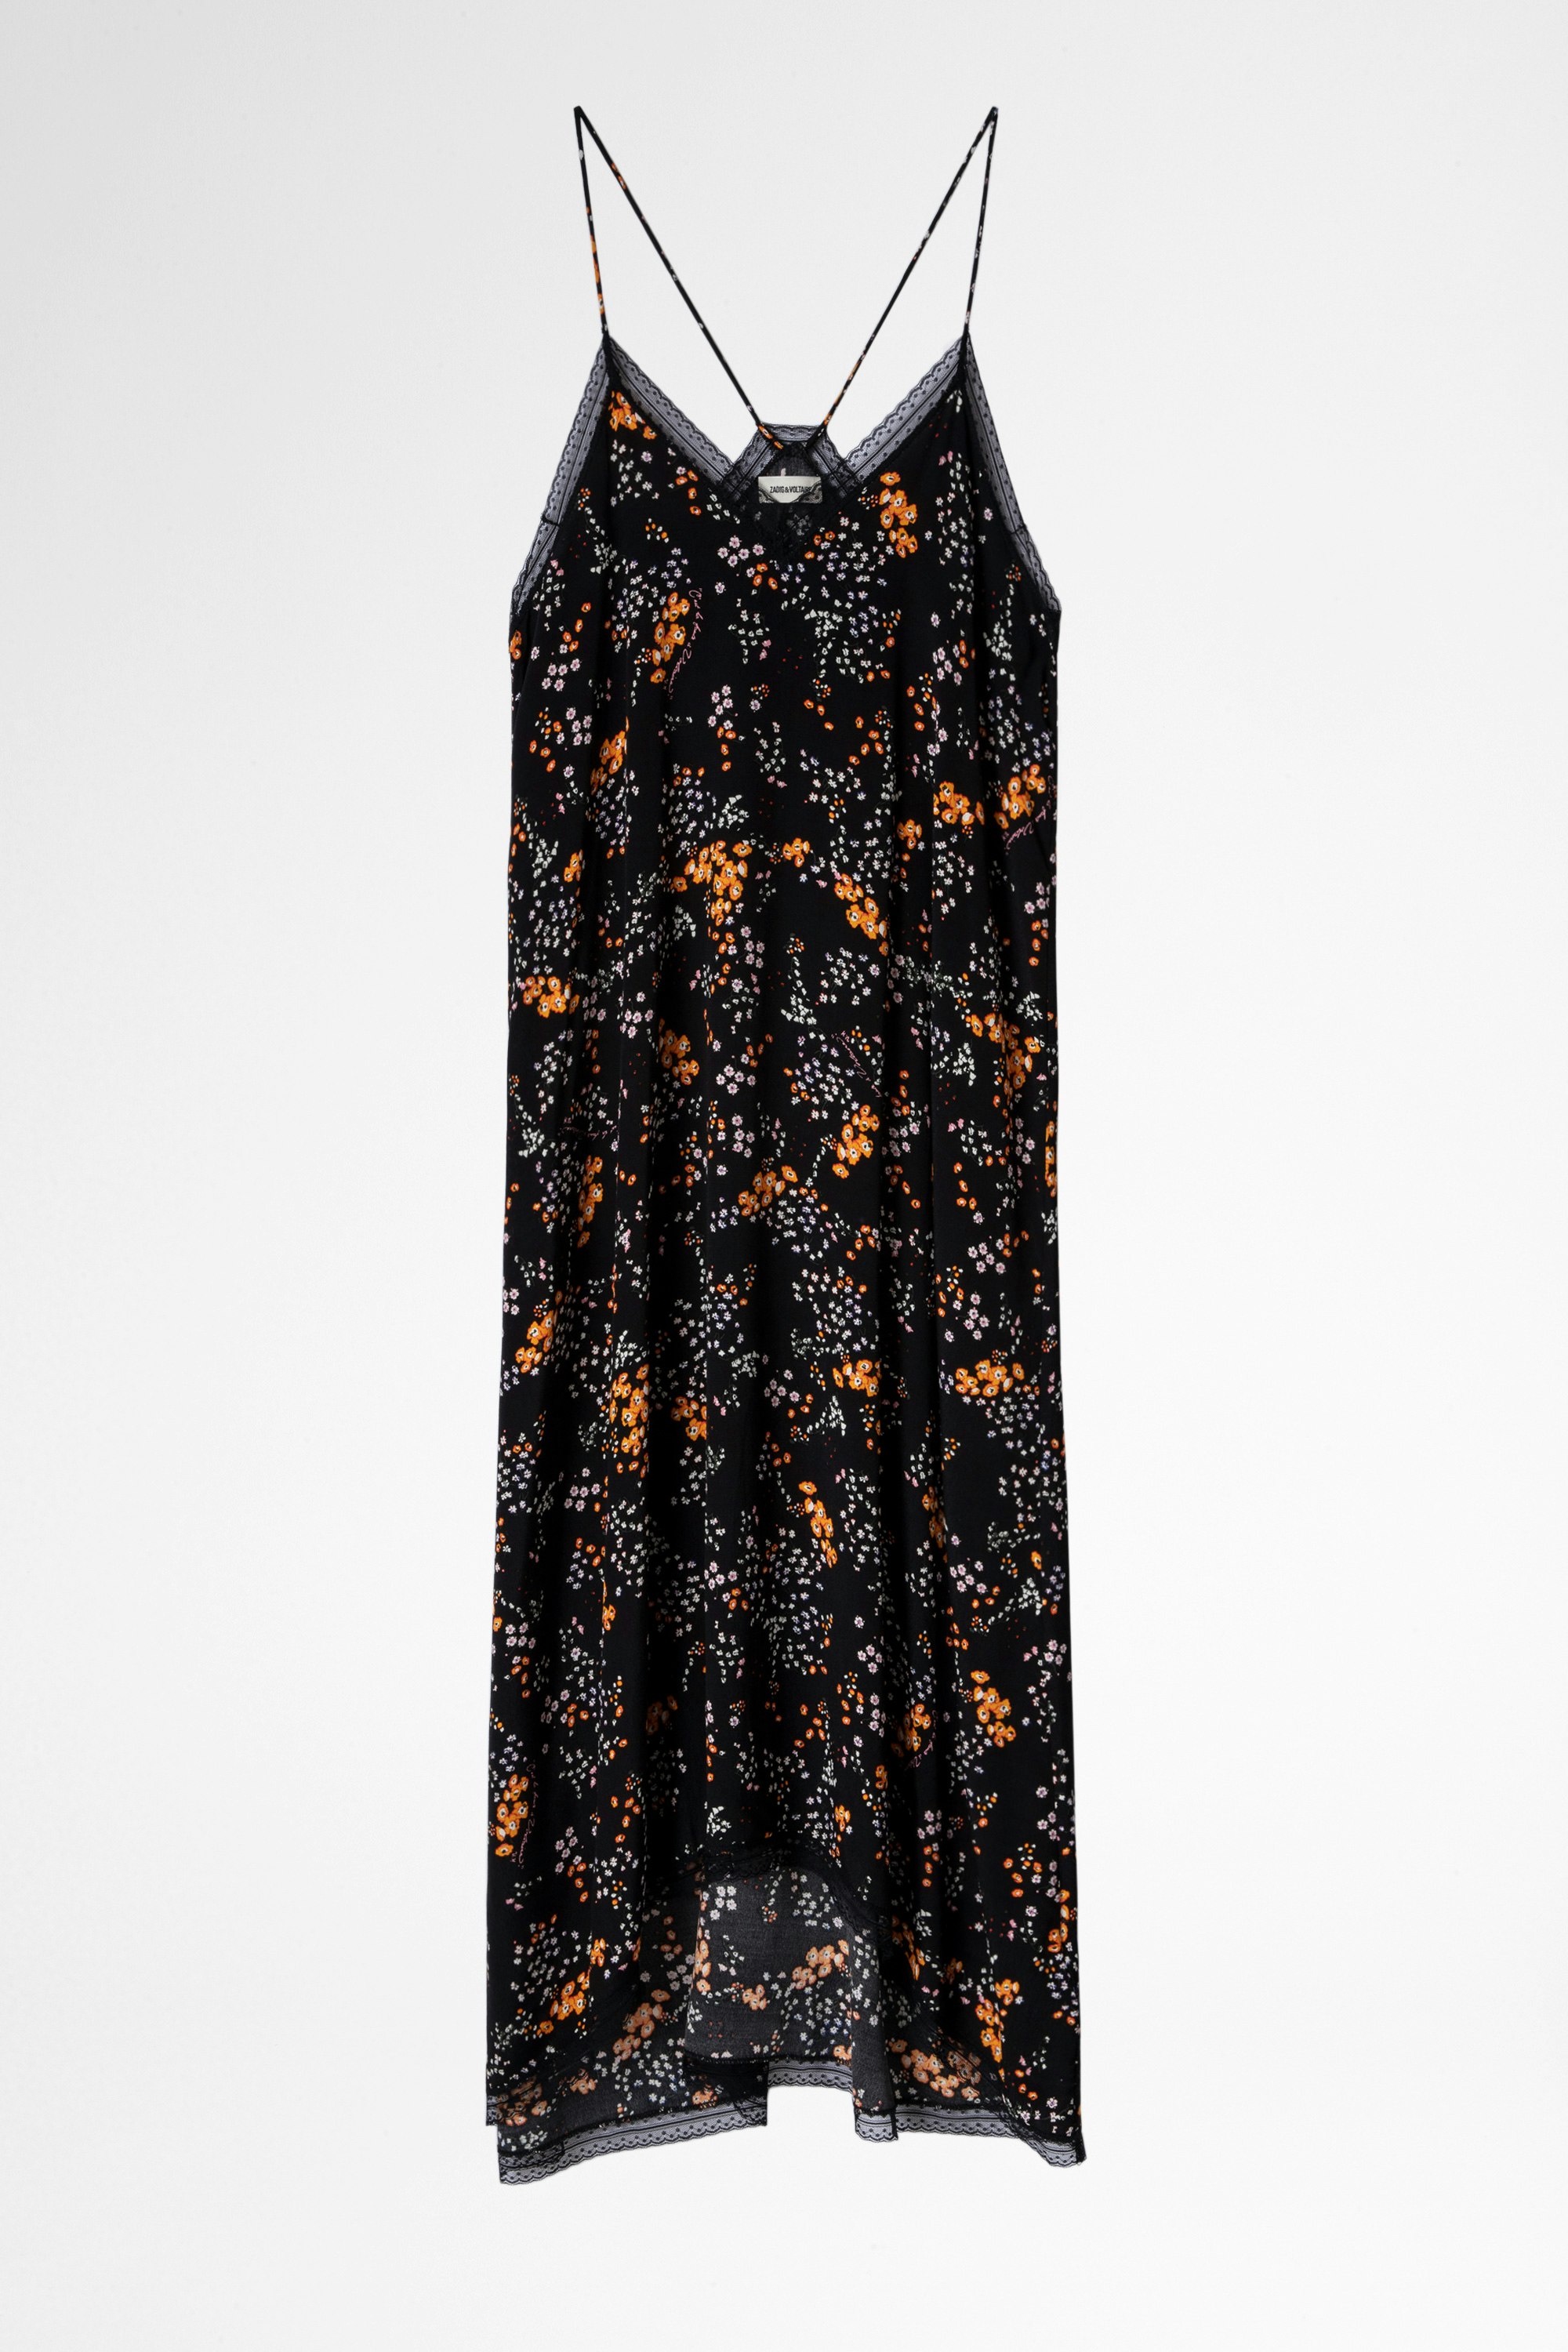 Risty Dress Women's black dress with thin straps and floral print